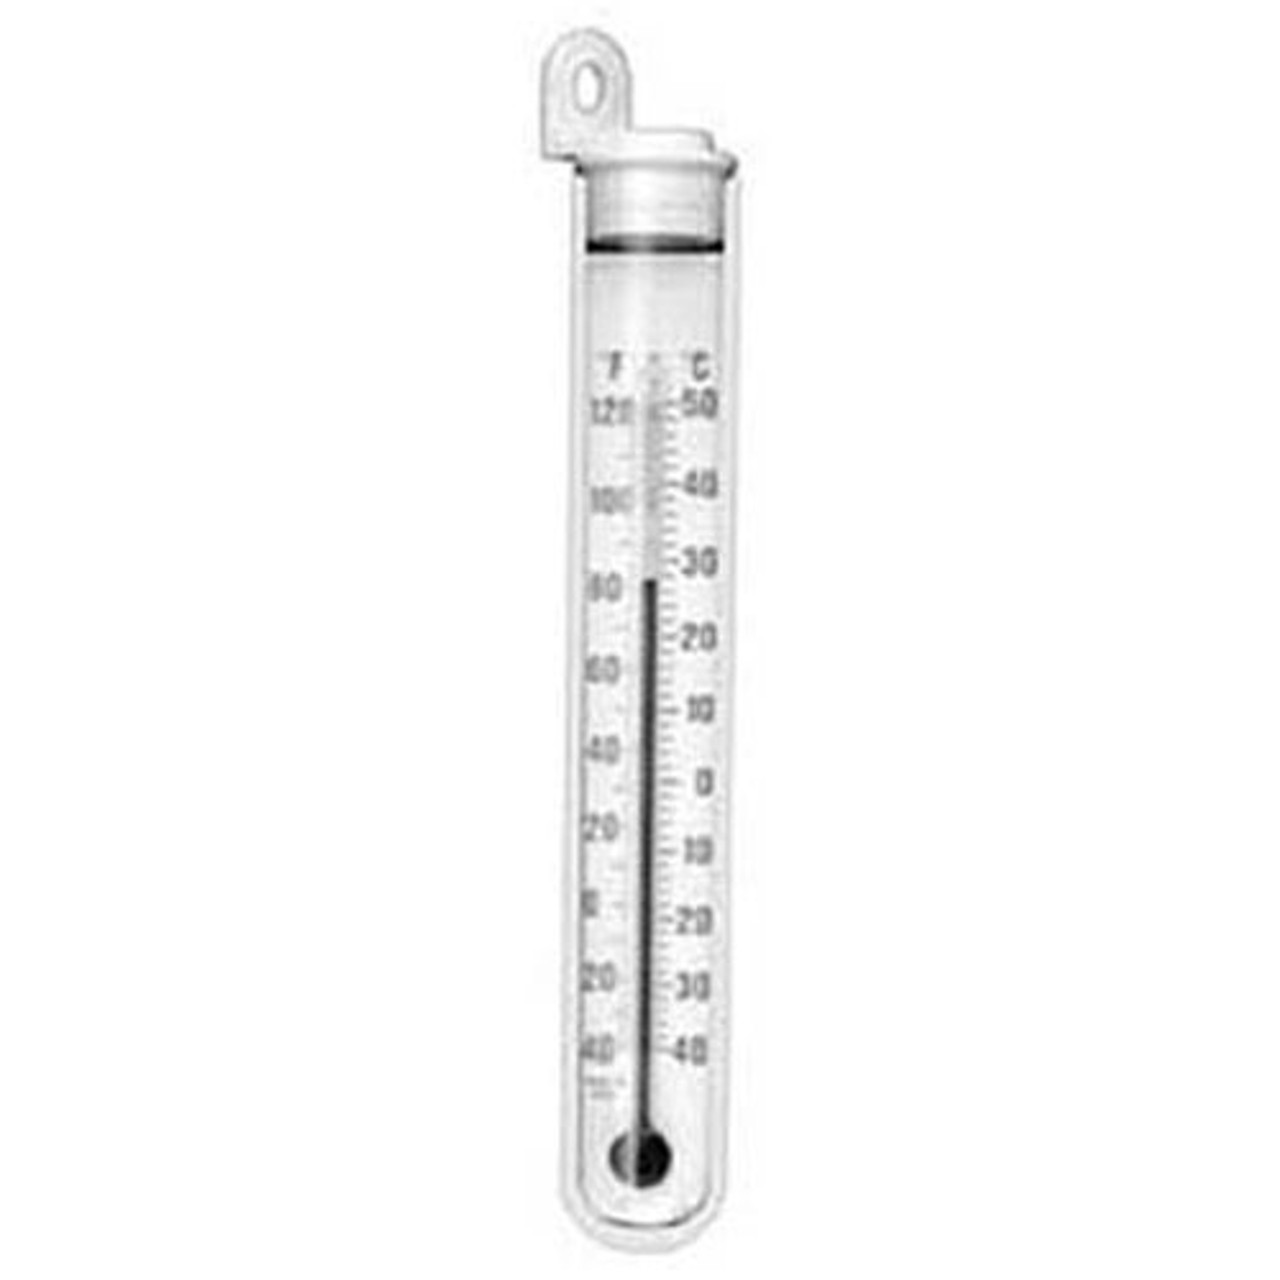 Thermometer , Top Brkt,-40/120 - Replacement Part For Howard 20-203